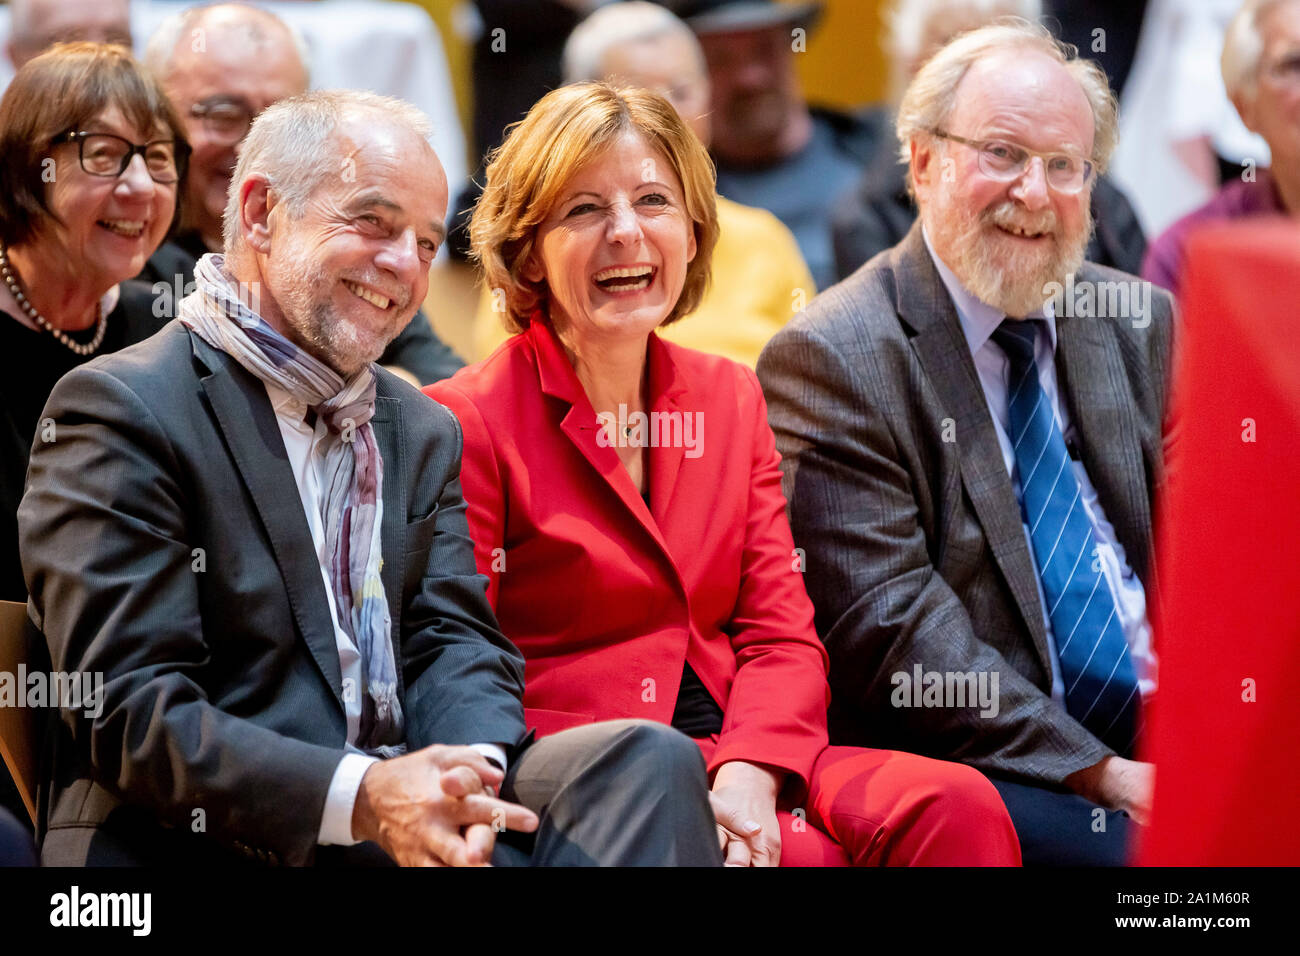 Berlin, Germany. 27th Sep, 2019. Klaus Jensen (SPD, l), husband of Malu Dreyer, Malu Dreyer, provisional SPD chairwoman and prime minister of Rhineland-Palatinate, and Wolfgang Thierse (SPD), former vice-president of the German Bundestag, laugh in the Willy Brandt House at the award of the August Bebel Prize to Malu Dreyer. The August Bebel Foundation was founded in 2010 by Günter Grass and honours people who, like August Bebel, have rendered outstanding services to the social movement in Germany. Credit: Christoph Soeder/dpa/Alamy Live News Stock Photo